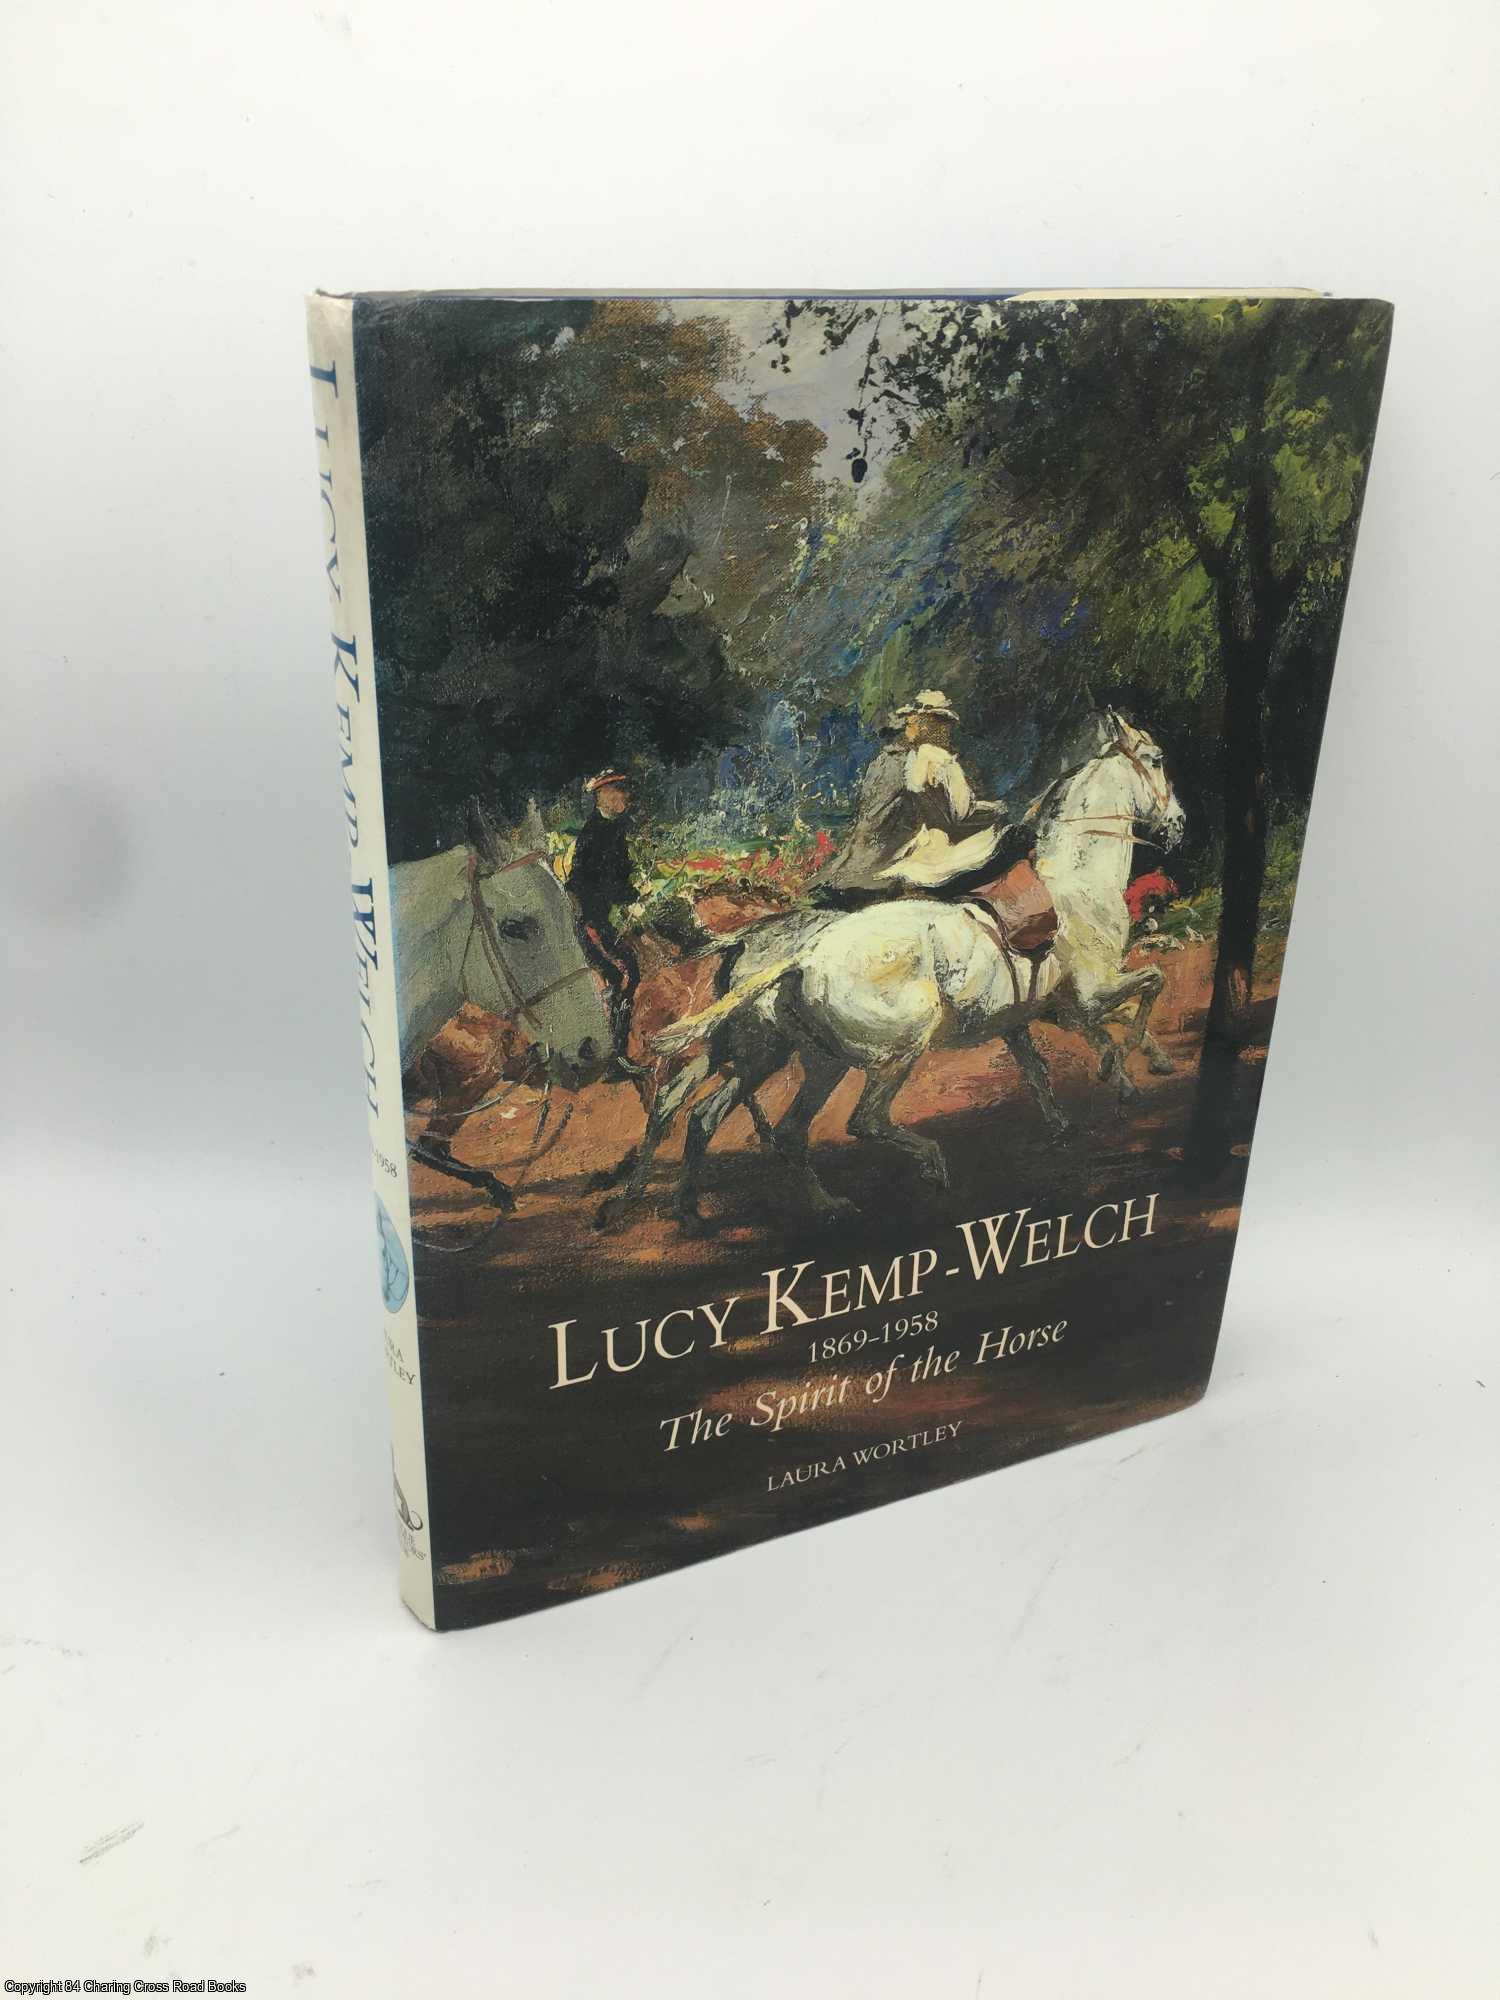 Wortley, Laura - Lucy Kemp-Welch, 1877-1958: The Spirit of the Horse